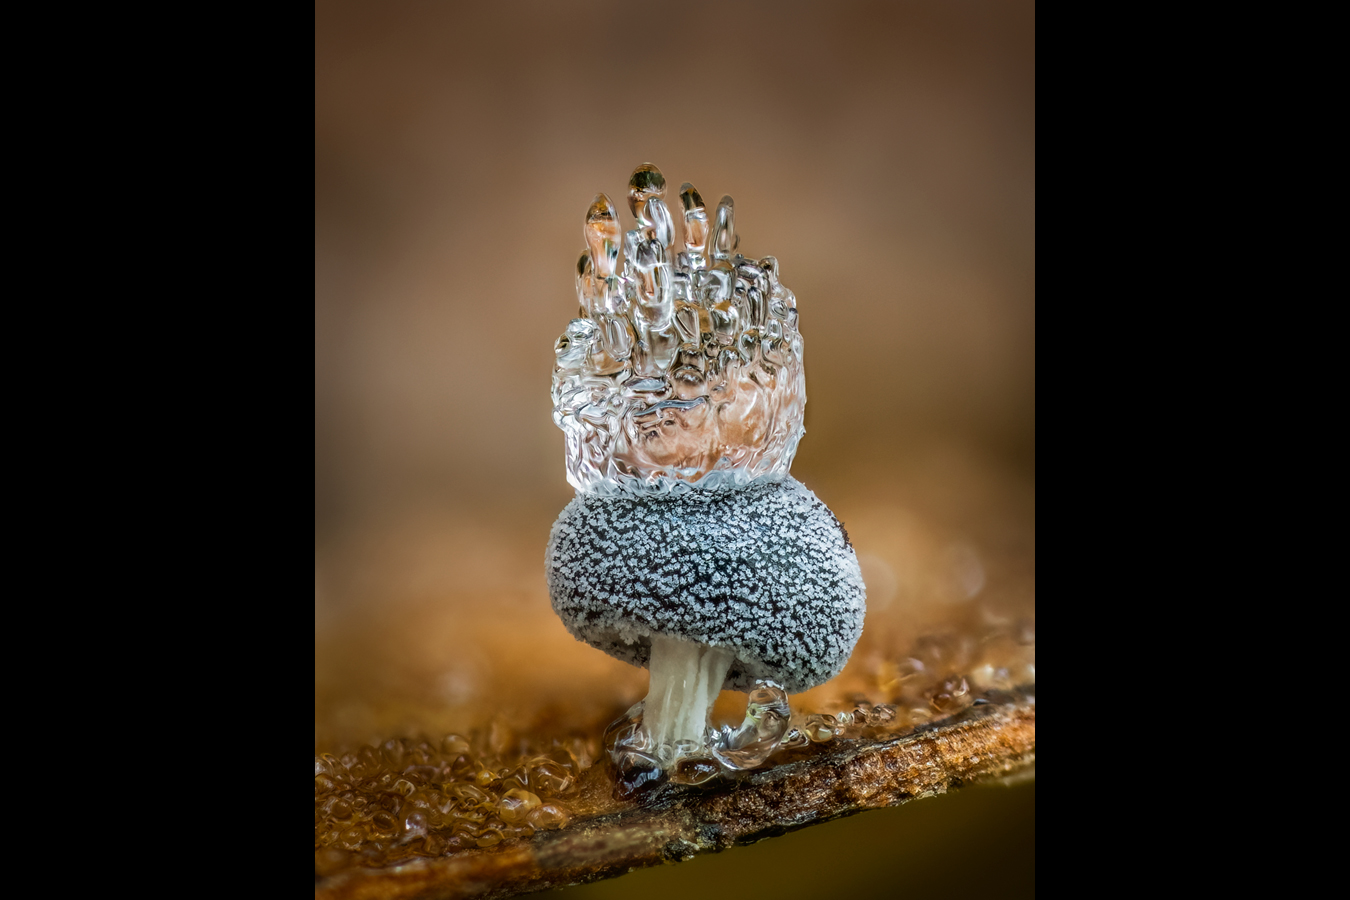 A tiny slime mould (Didymium squamulosum) proudly wears a crown of ice. Photo: Barry Webb, winner in the Fungi category.  ​​📷 A microscopic cross⁣ Category Micro ⁣ Gerhard Vlcek | cupoty.com⁣